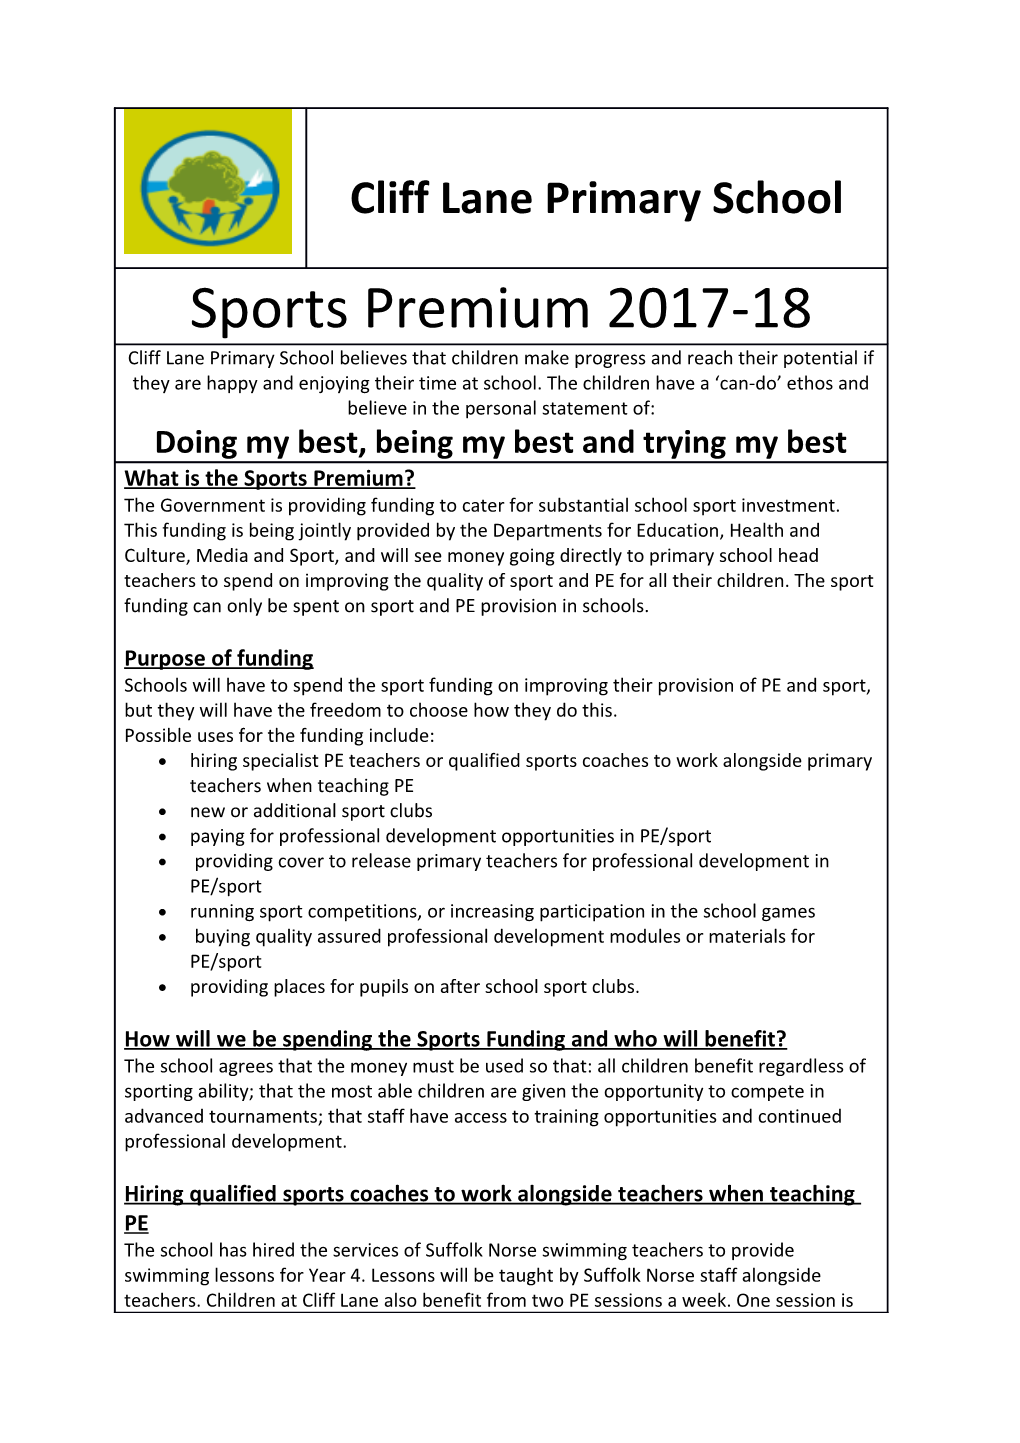 New Or Additional Sport Clubs